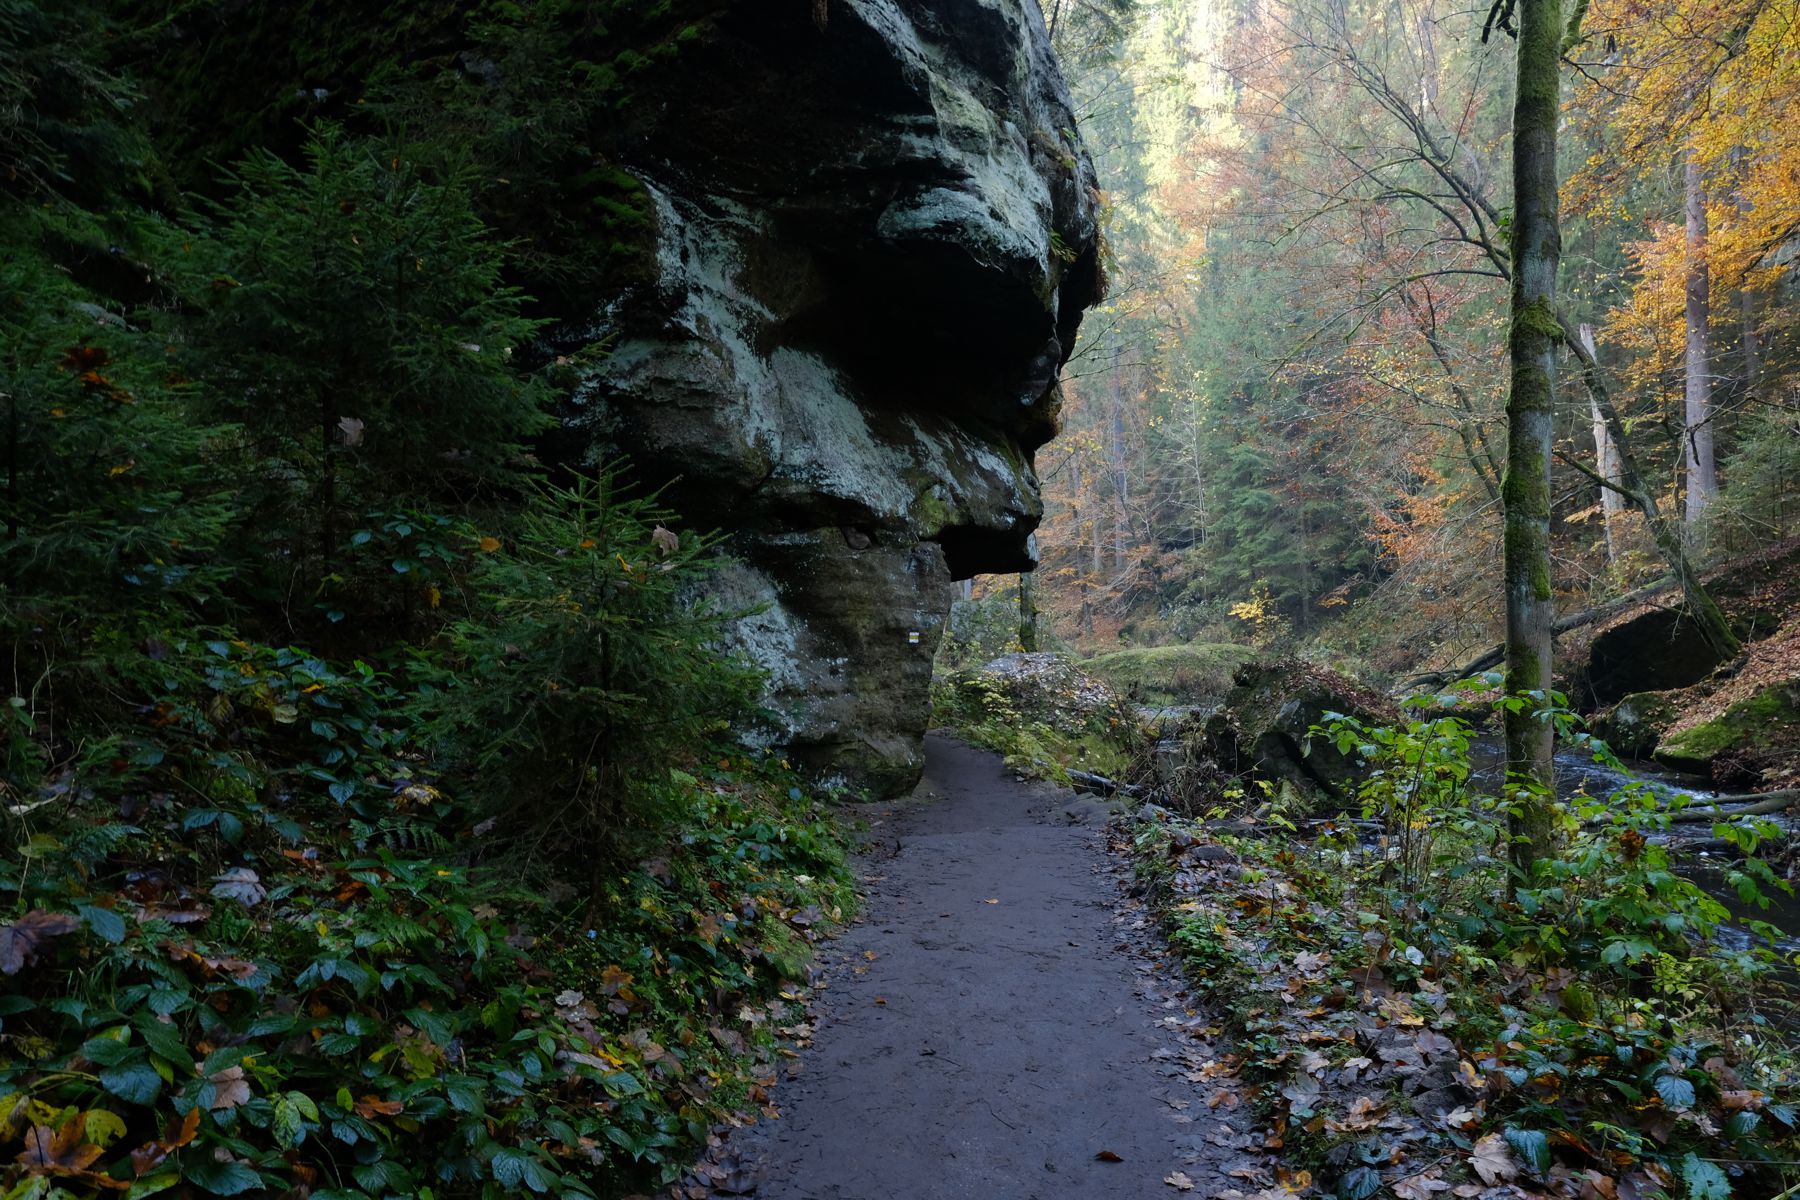 Face-like rock formation over footpath